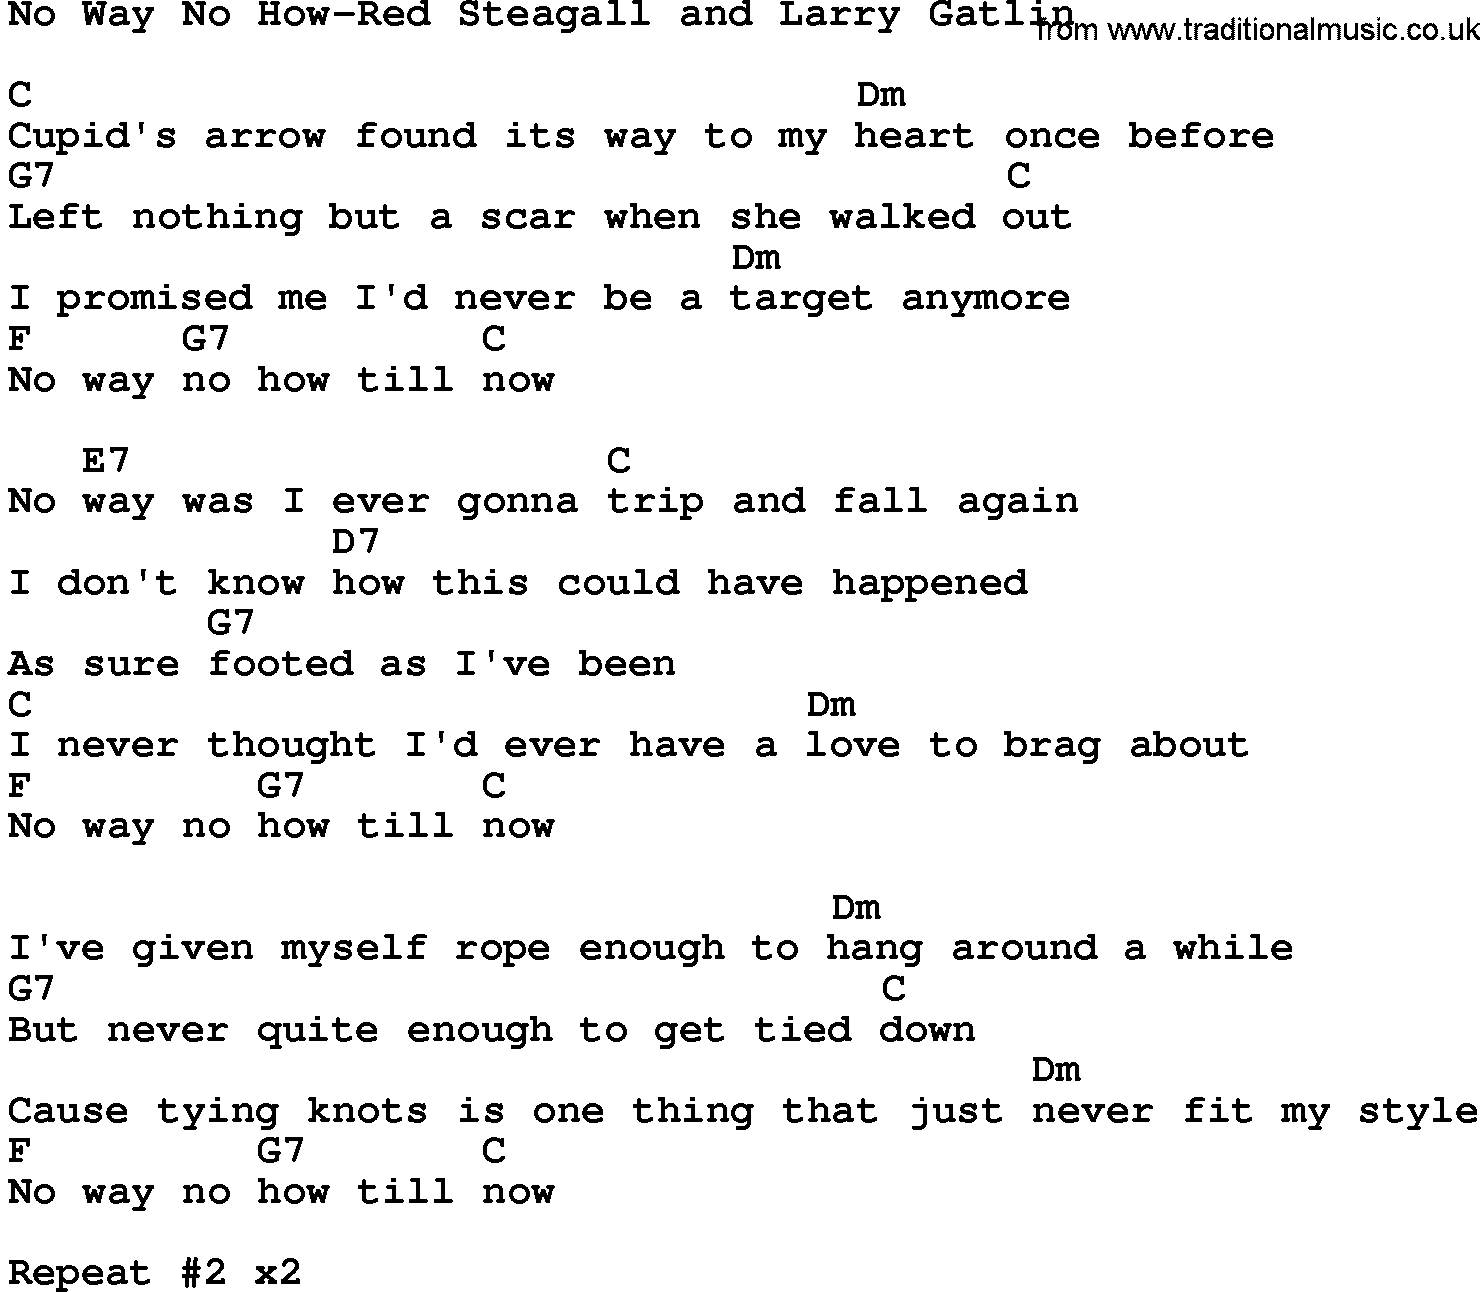 Country music song: No Way No How-Red Steagall And Larry Gatlin lyrics and chords